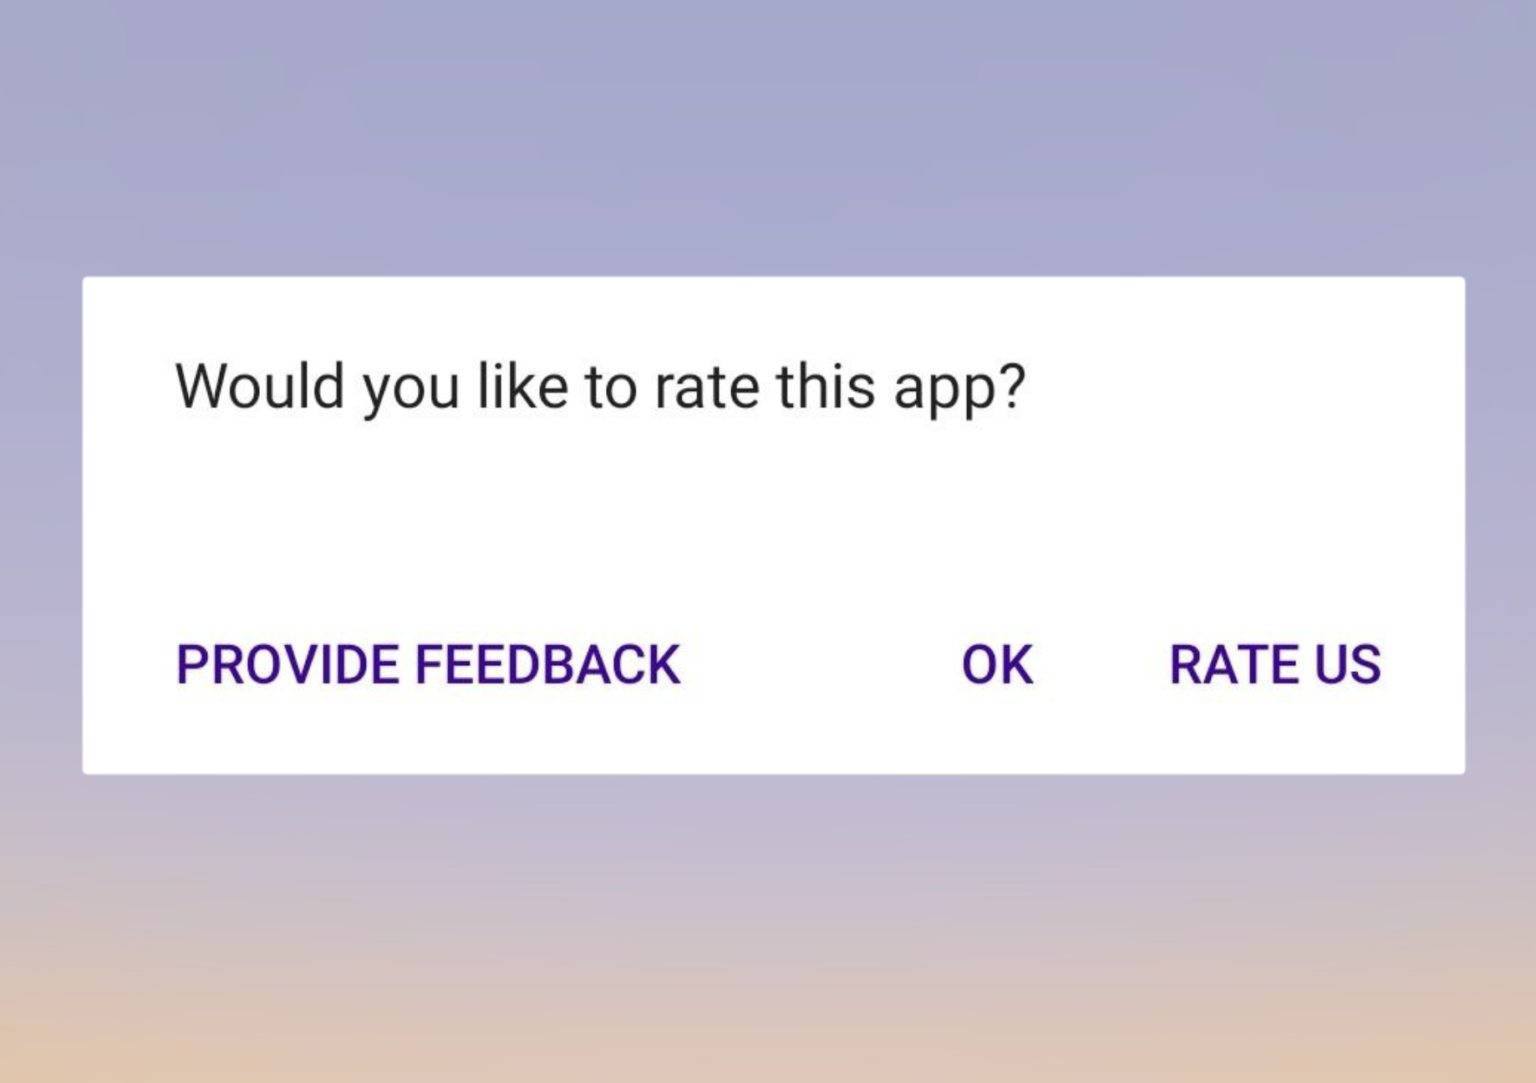 Would you like to rate this App?